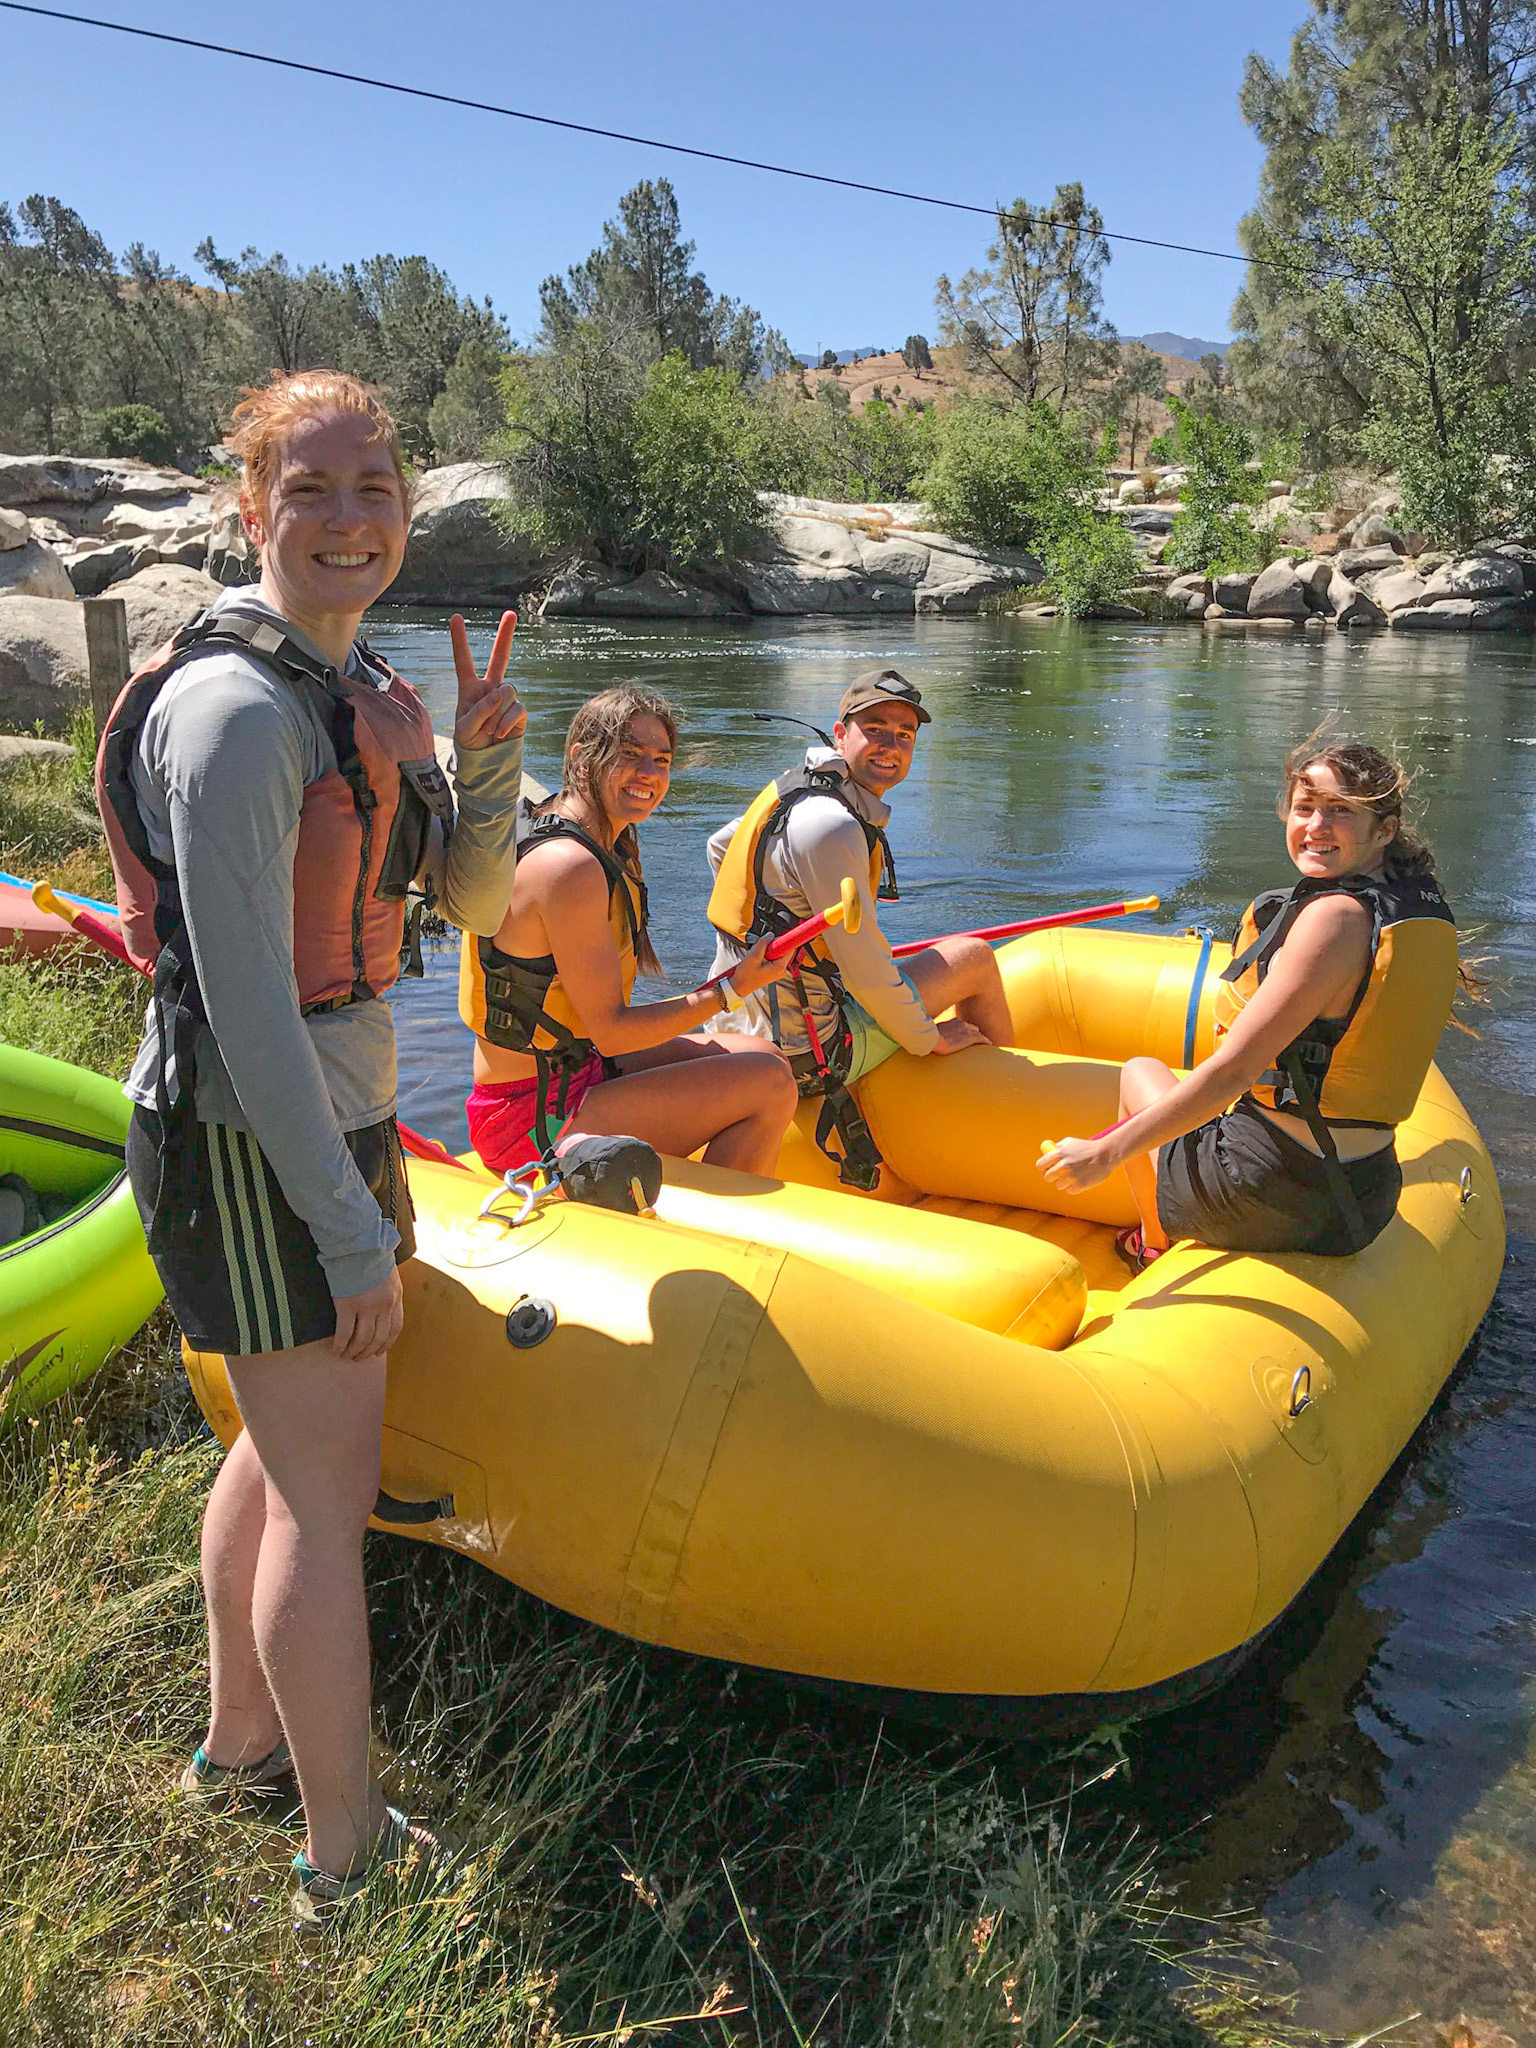 A group by the Kern River with a raft they rented from Kern River Rentals.